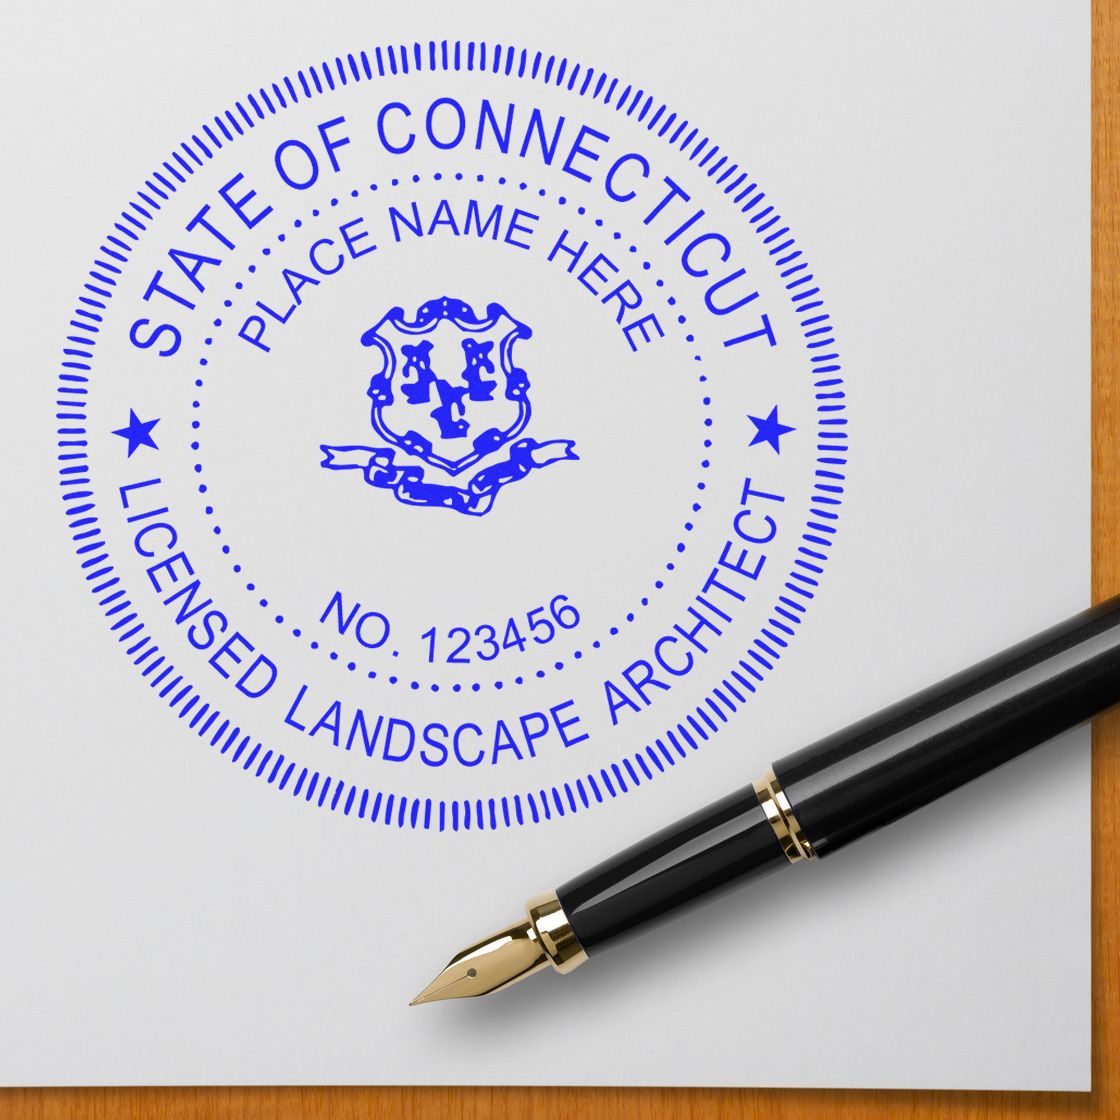 The Premium MaxLight Pre-Inked Connecticut Landscape Architectural Stamp stamp impression comes to life with a crisp, detailed photo on paper - showcasing true professional quality.